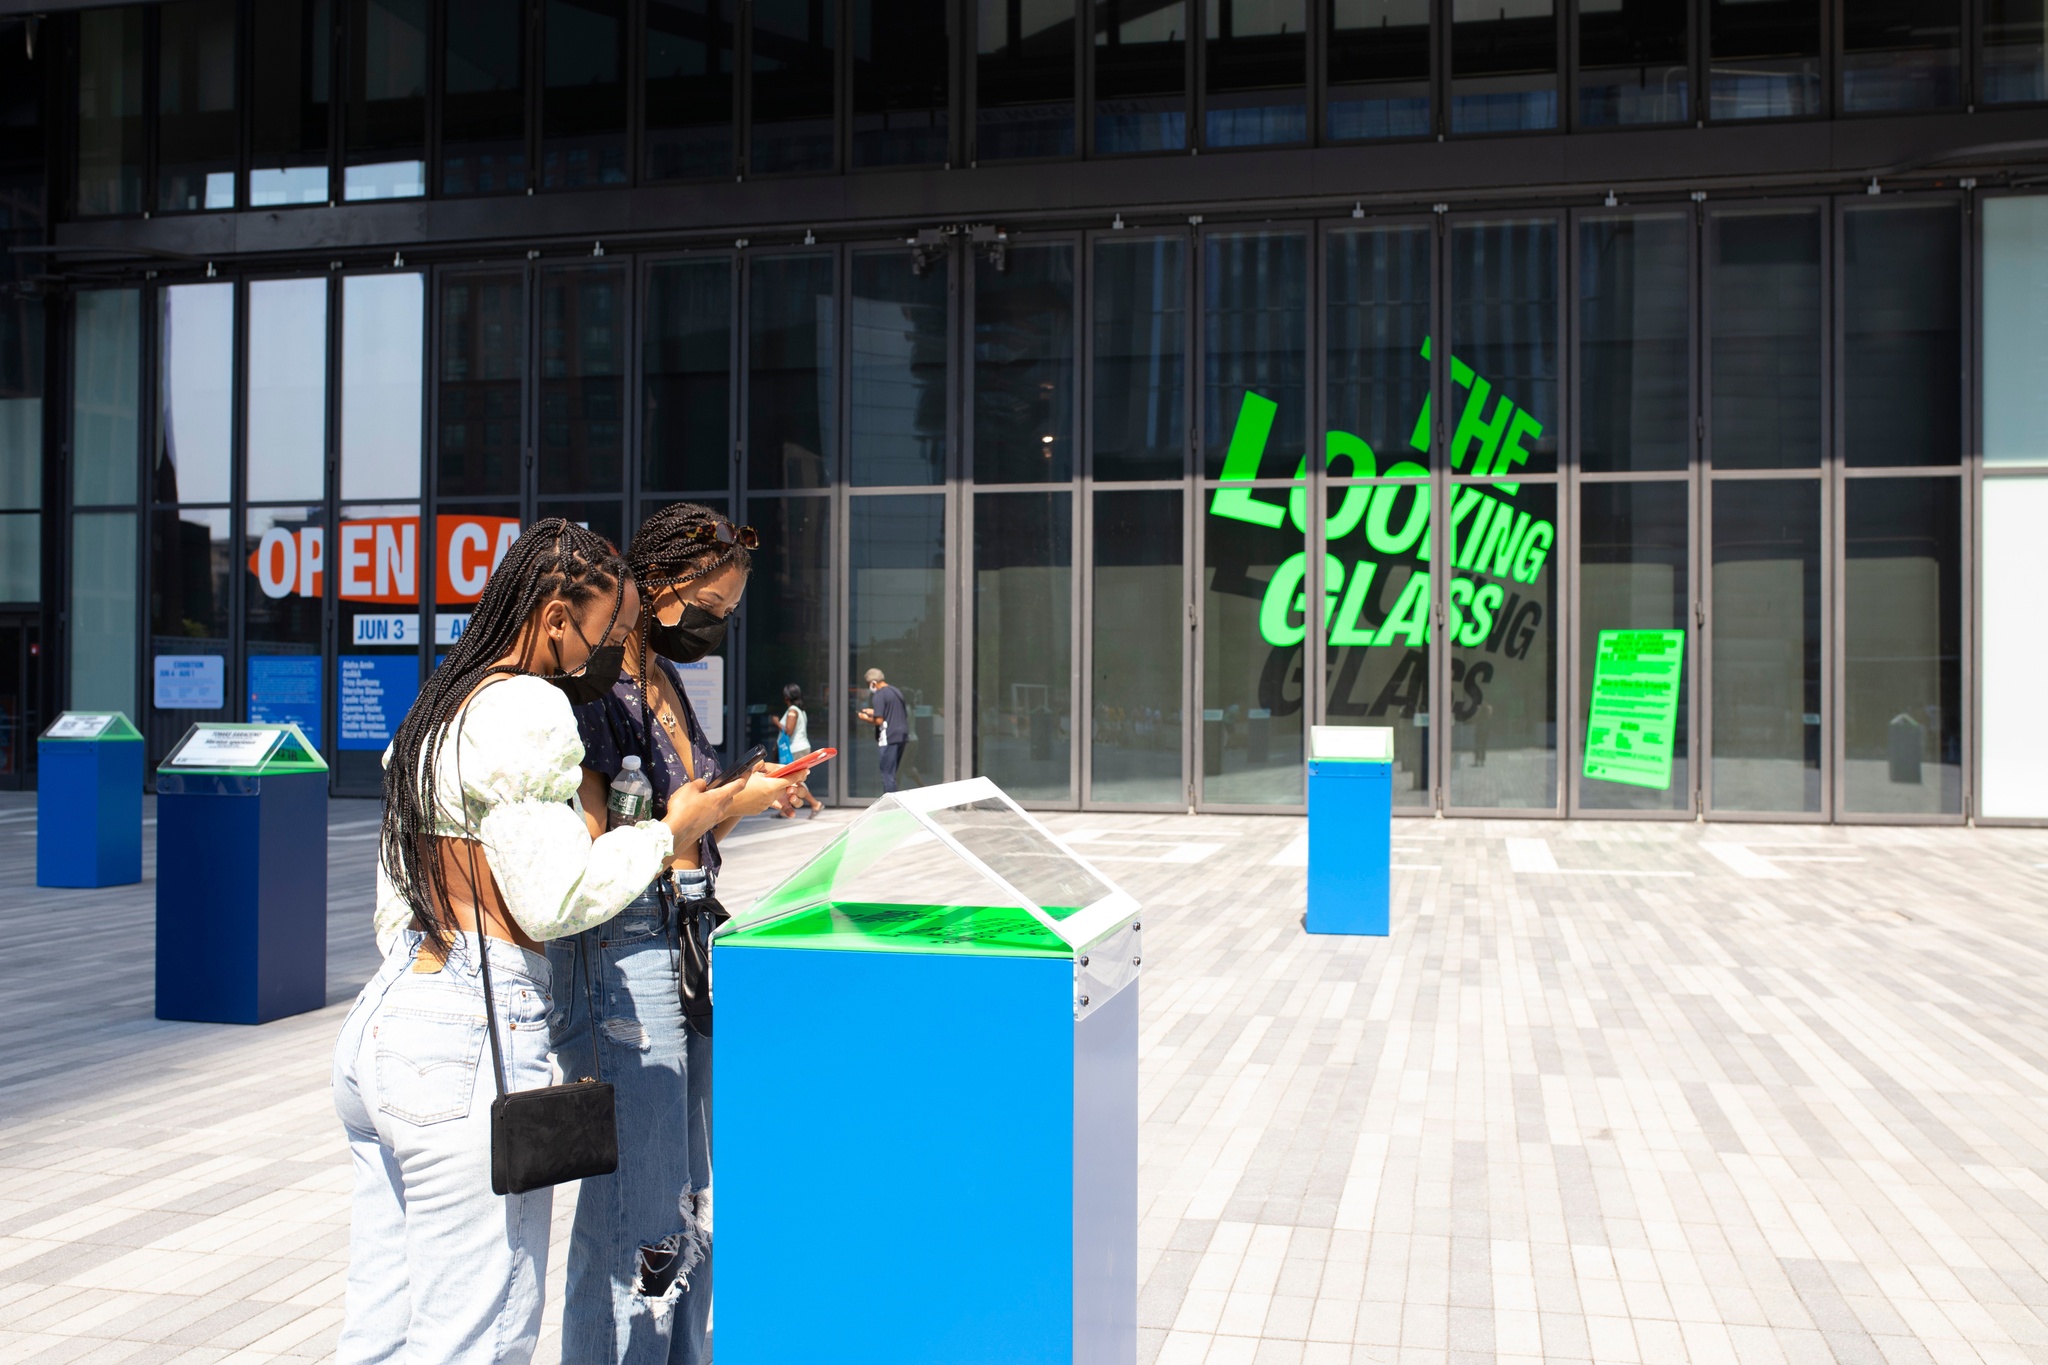 Two people with long braids lean over a bright blue plinth used to activate the exhibition The Looking Glass on a sunny outdoor plaza